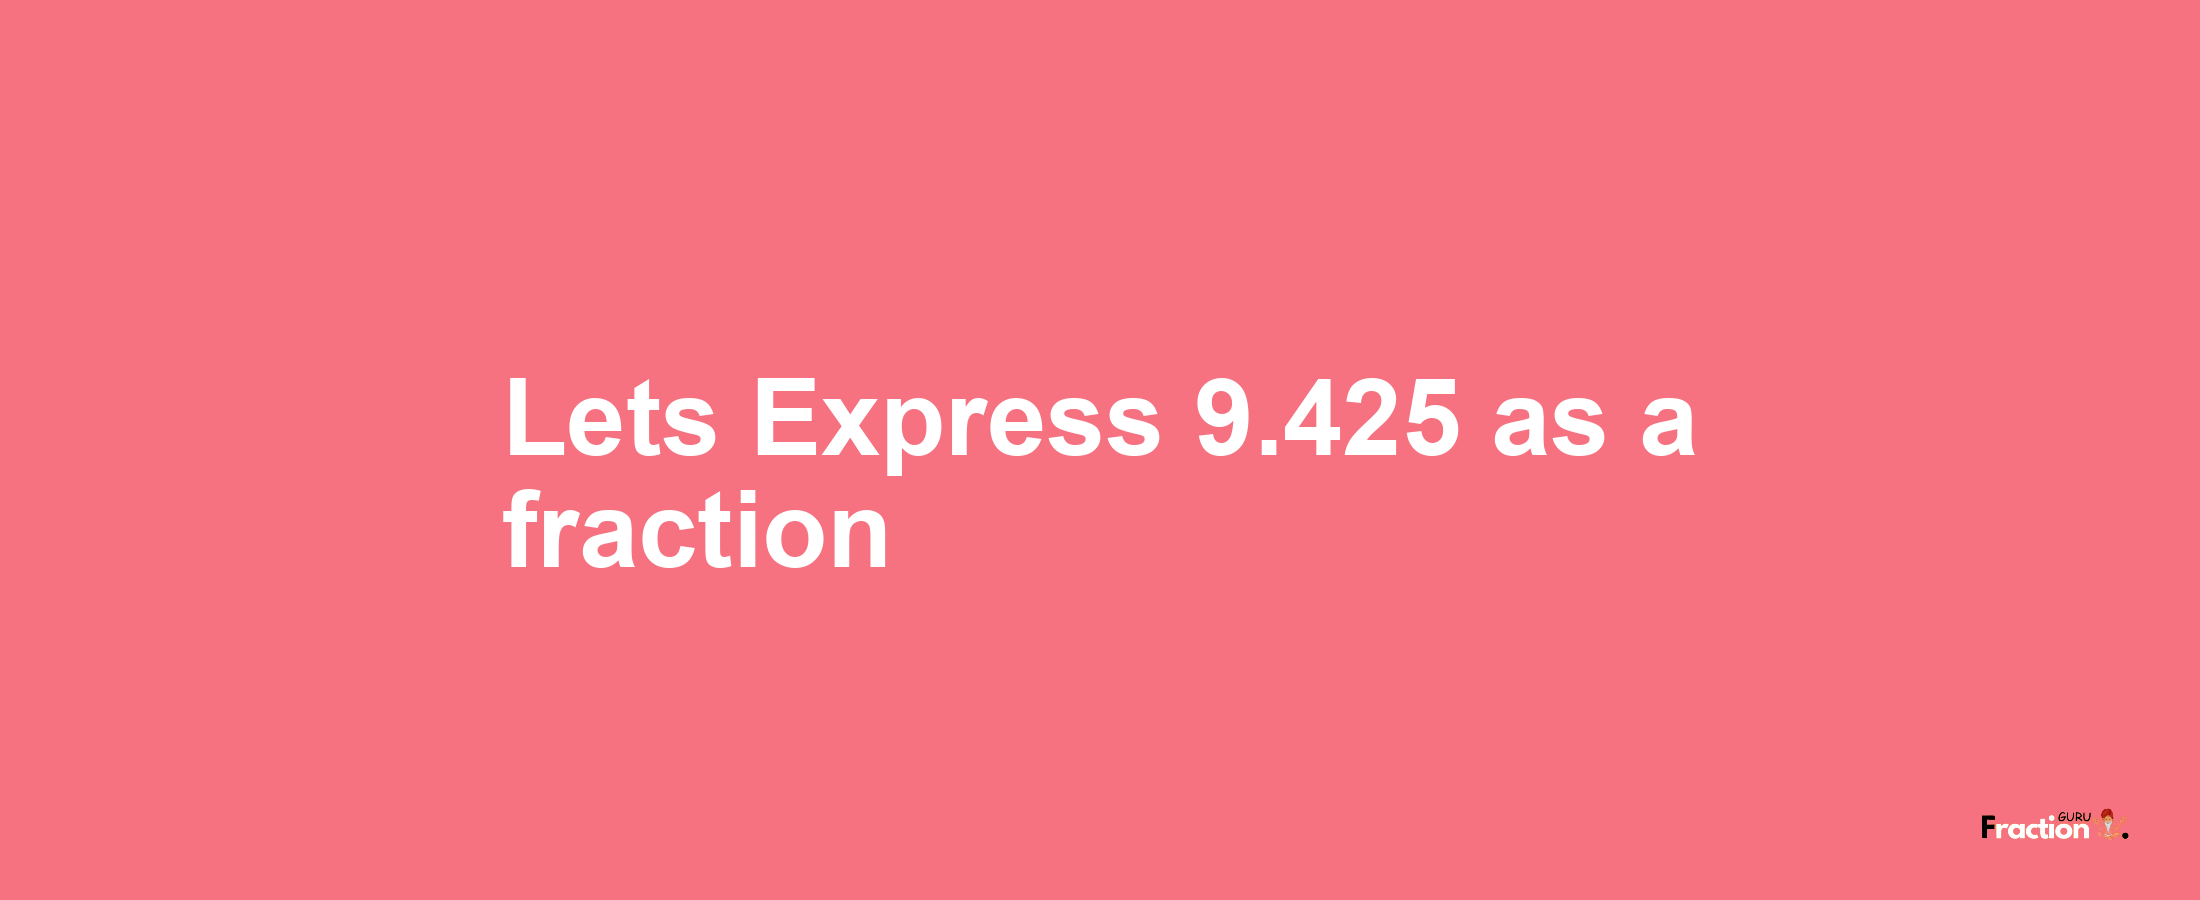 Lets Express 9.425 as afraction